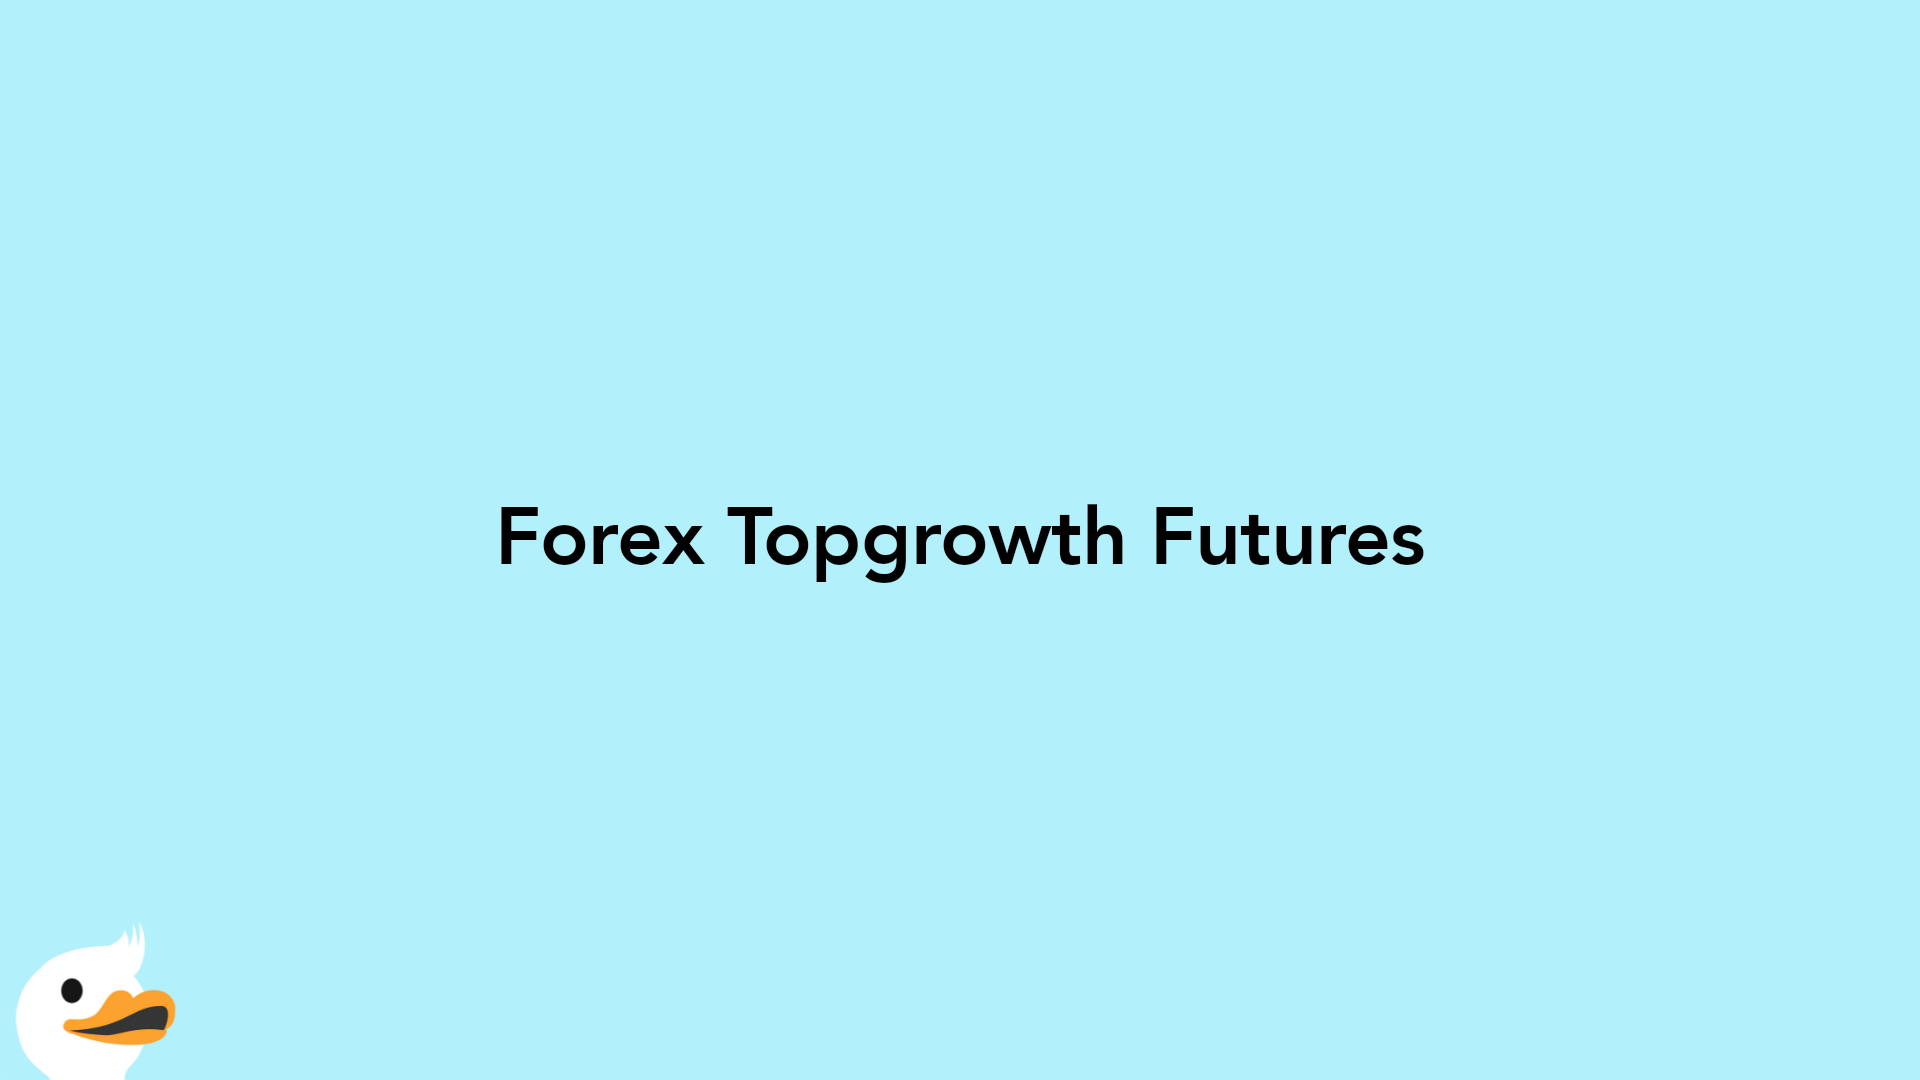 Forex Topgrowth Futures